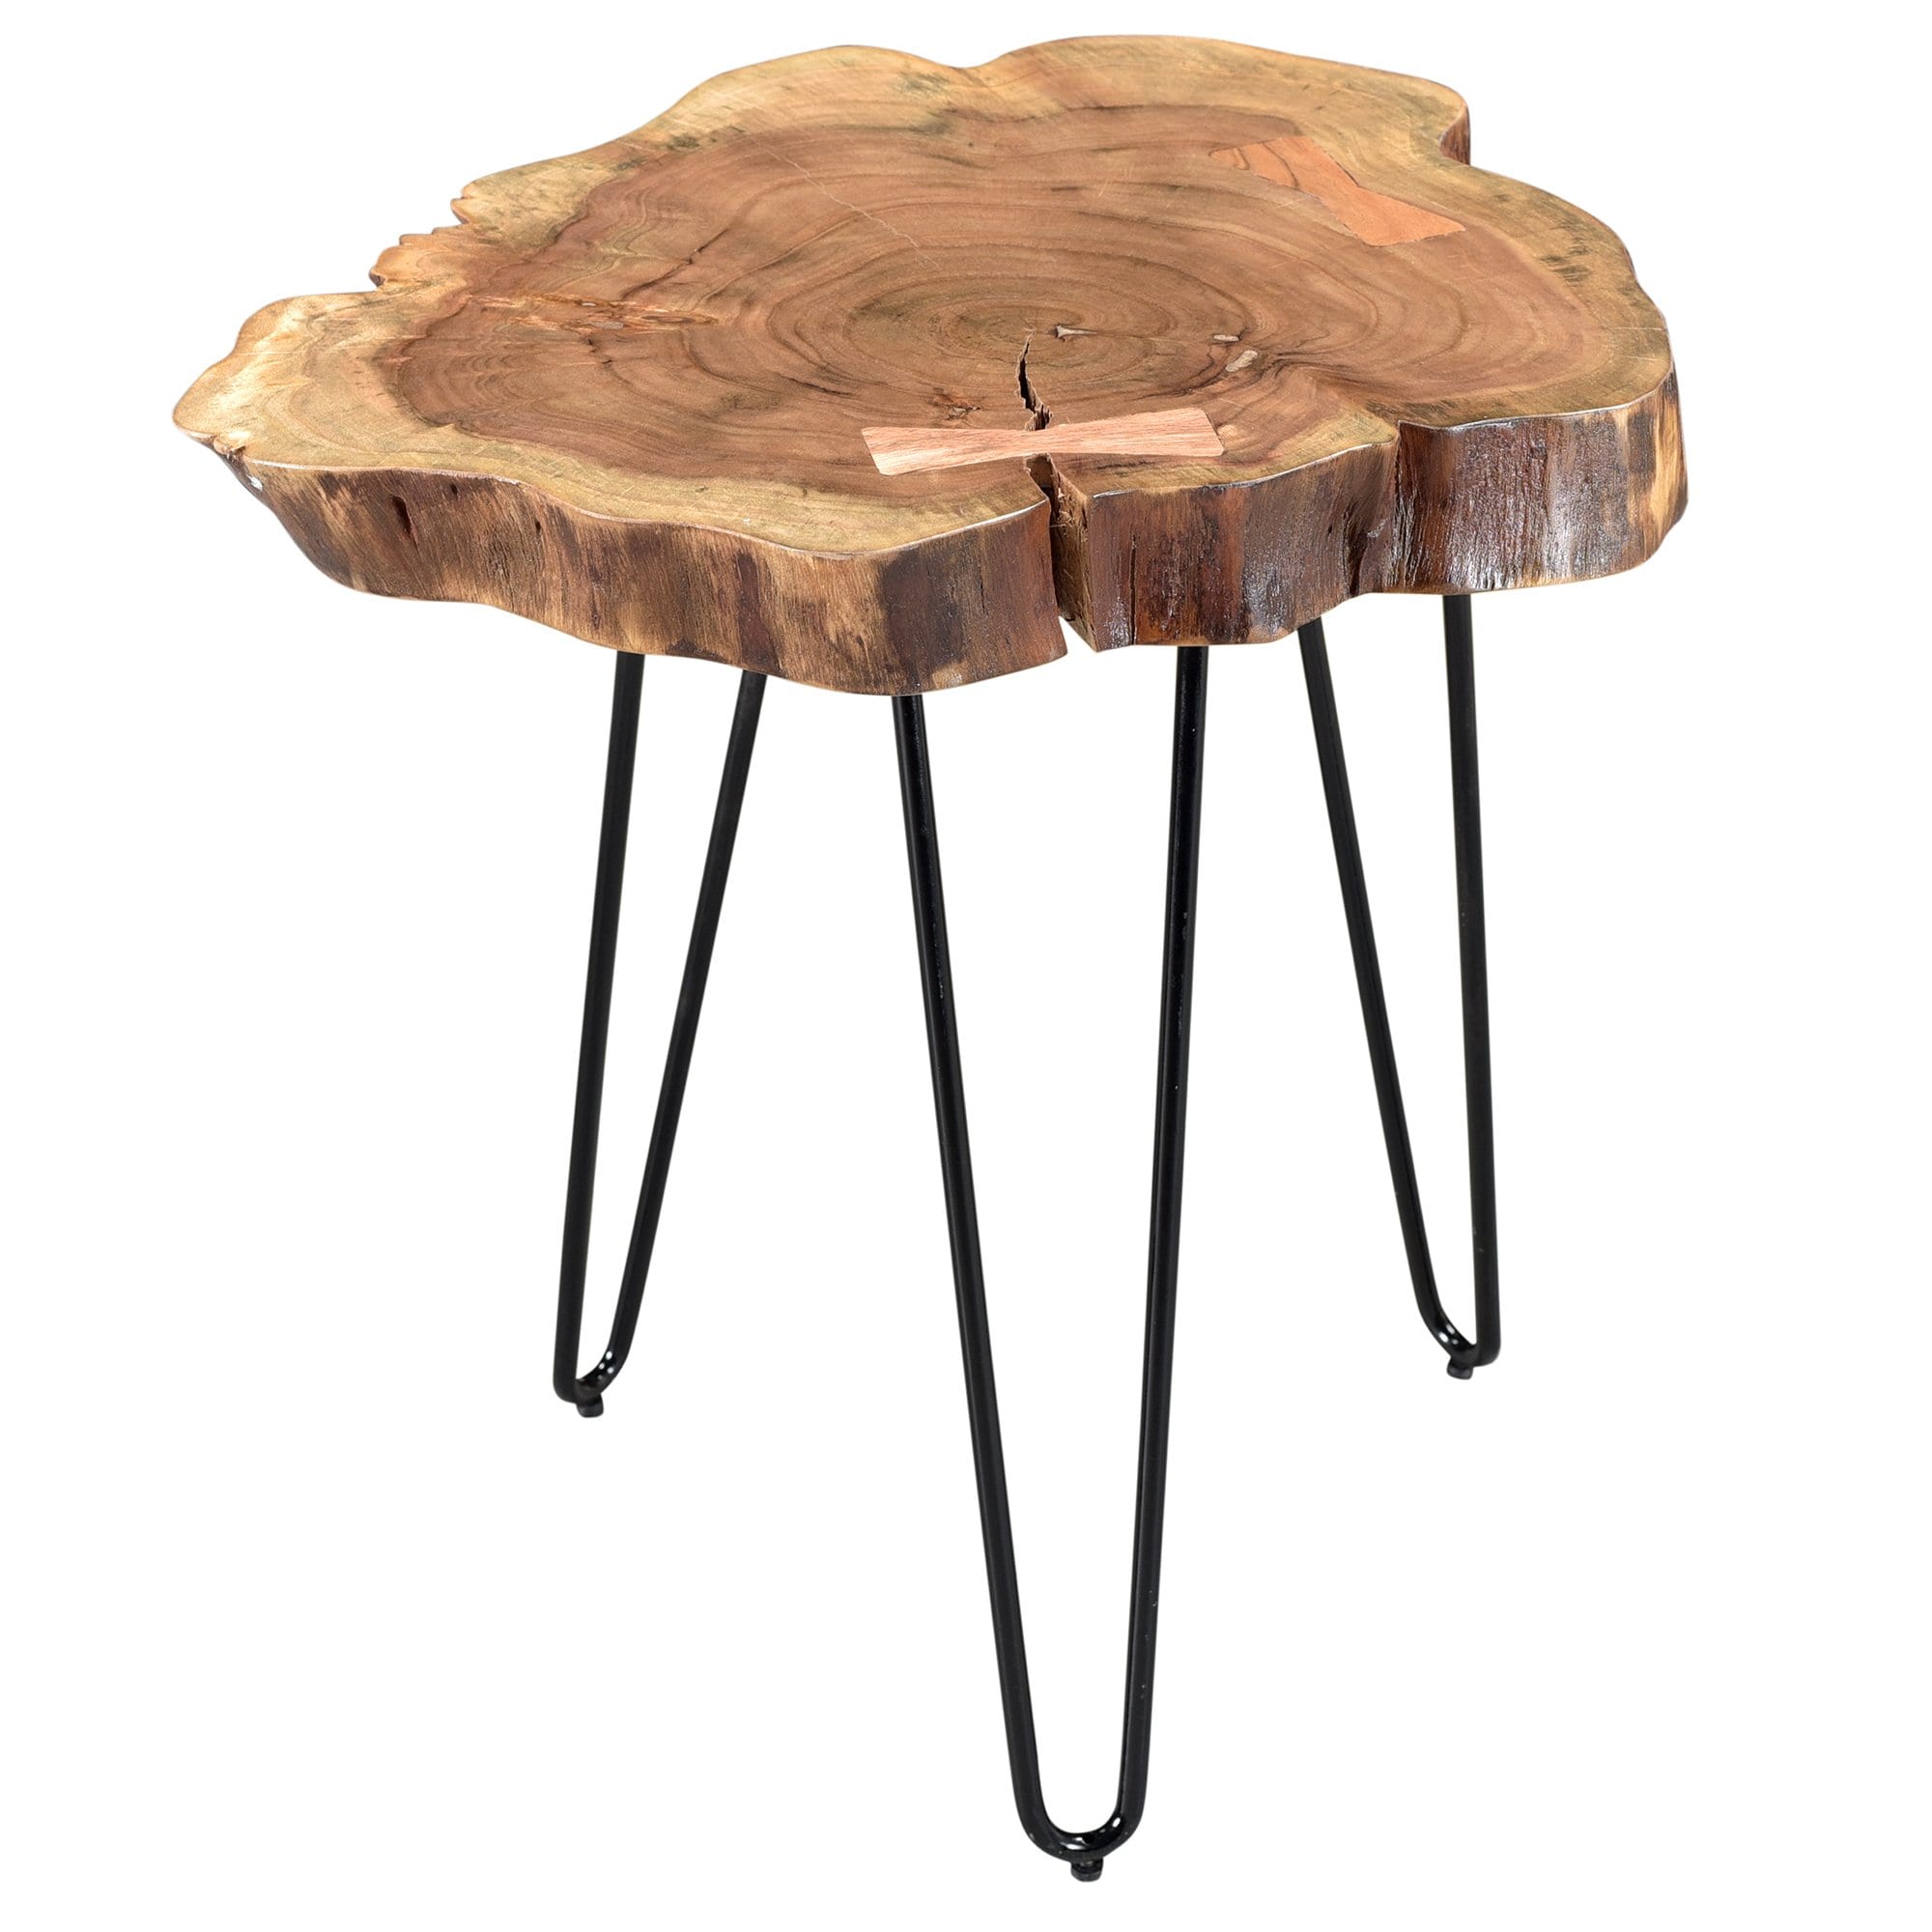 nila acacia wood wrought iron accent table free shipping acasia round with screw legs unfinished tops pottery barn spotlight lamp lavita furniture mid century dresser cordless